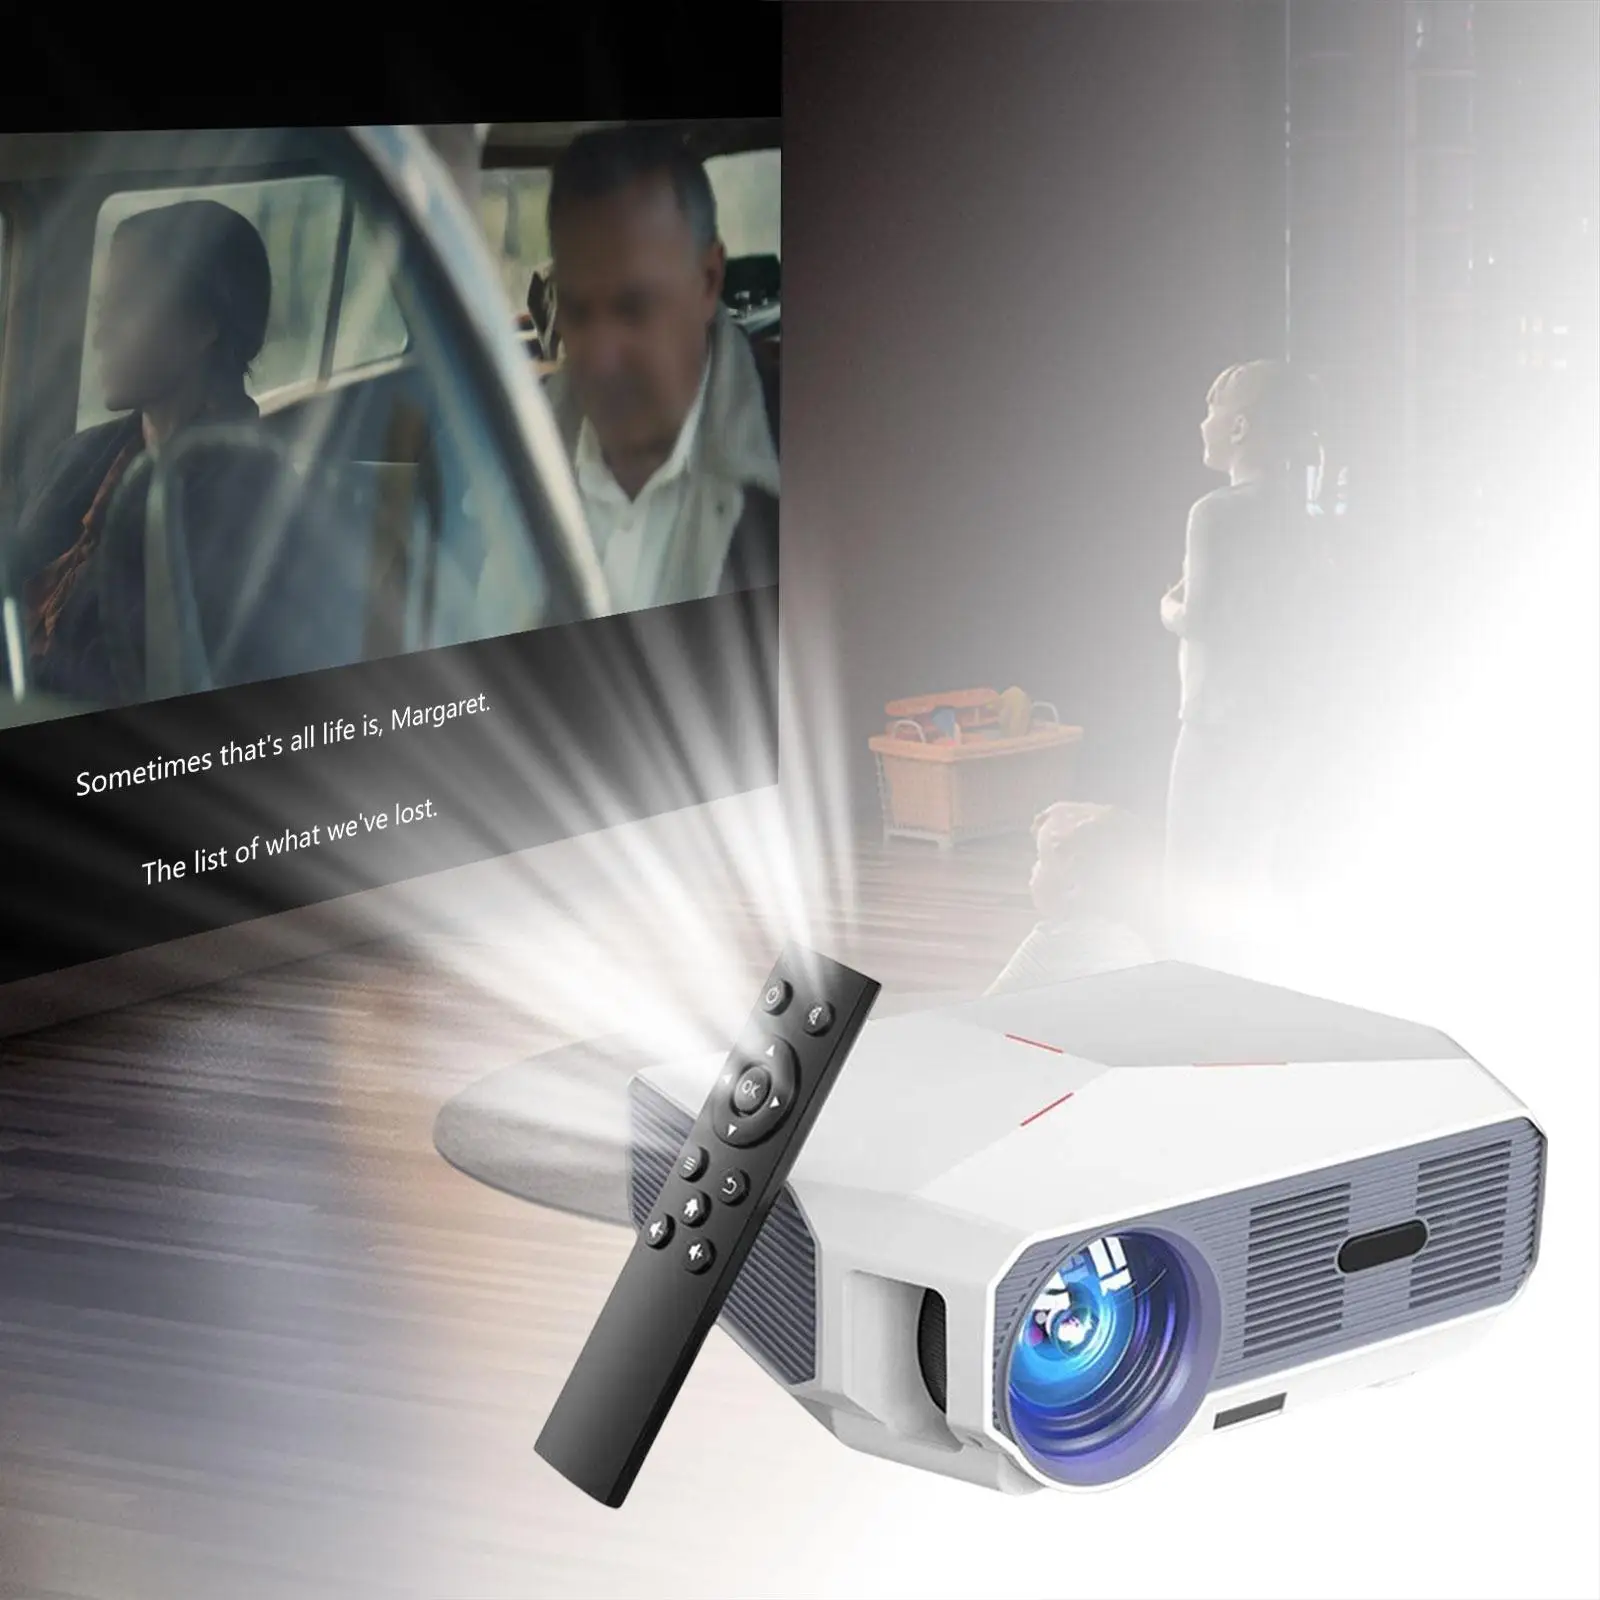 Outdoor Movie Projector 300 ANSI 4600 Lumens LED Home Theater Projectors for Meeting Work Study Entertainment Kids Adults Gift